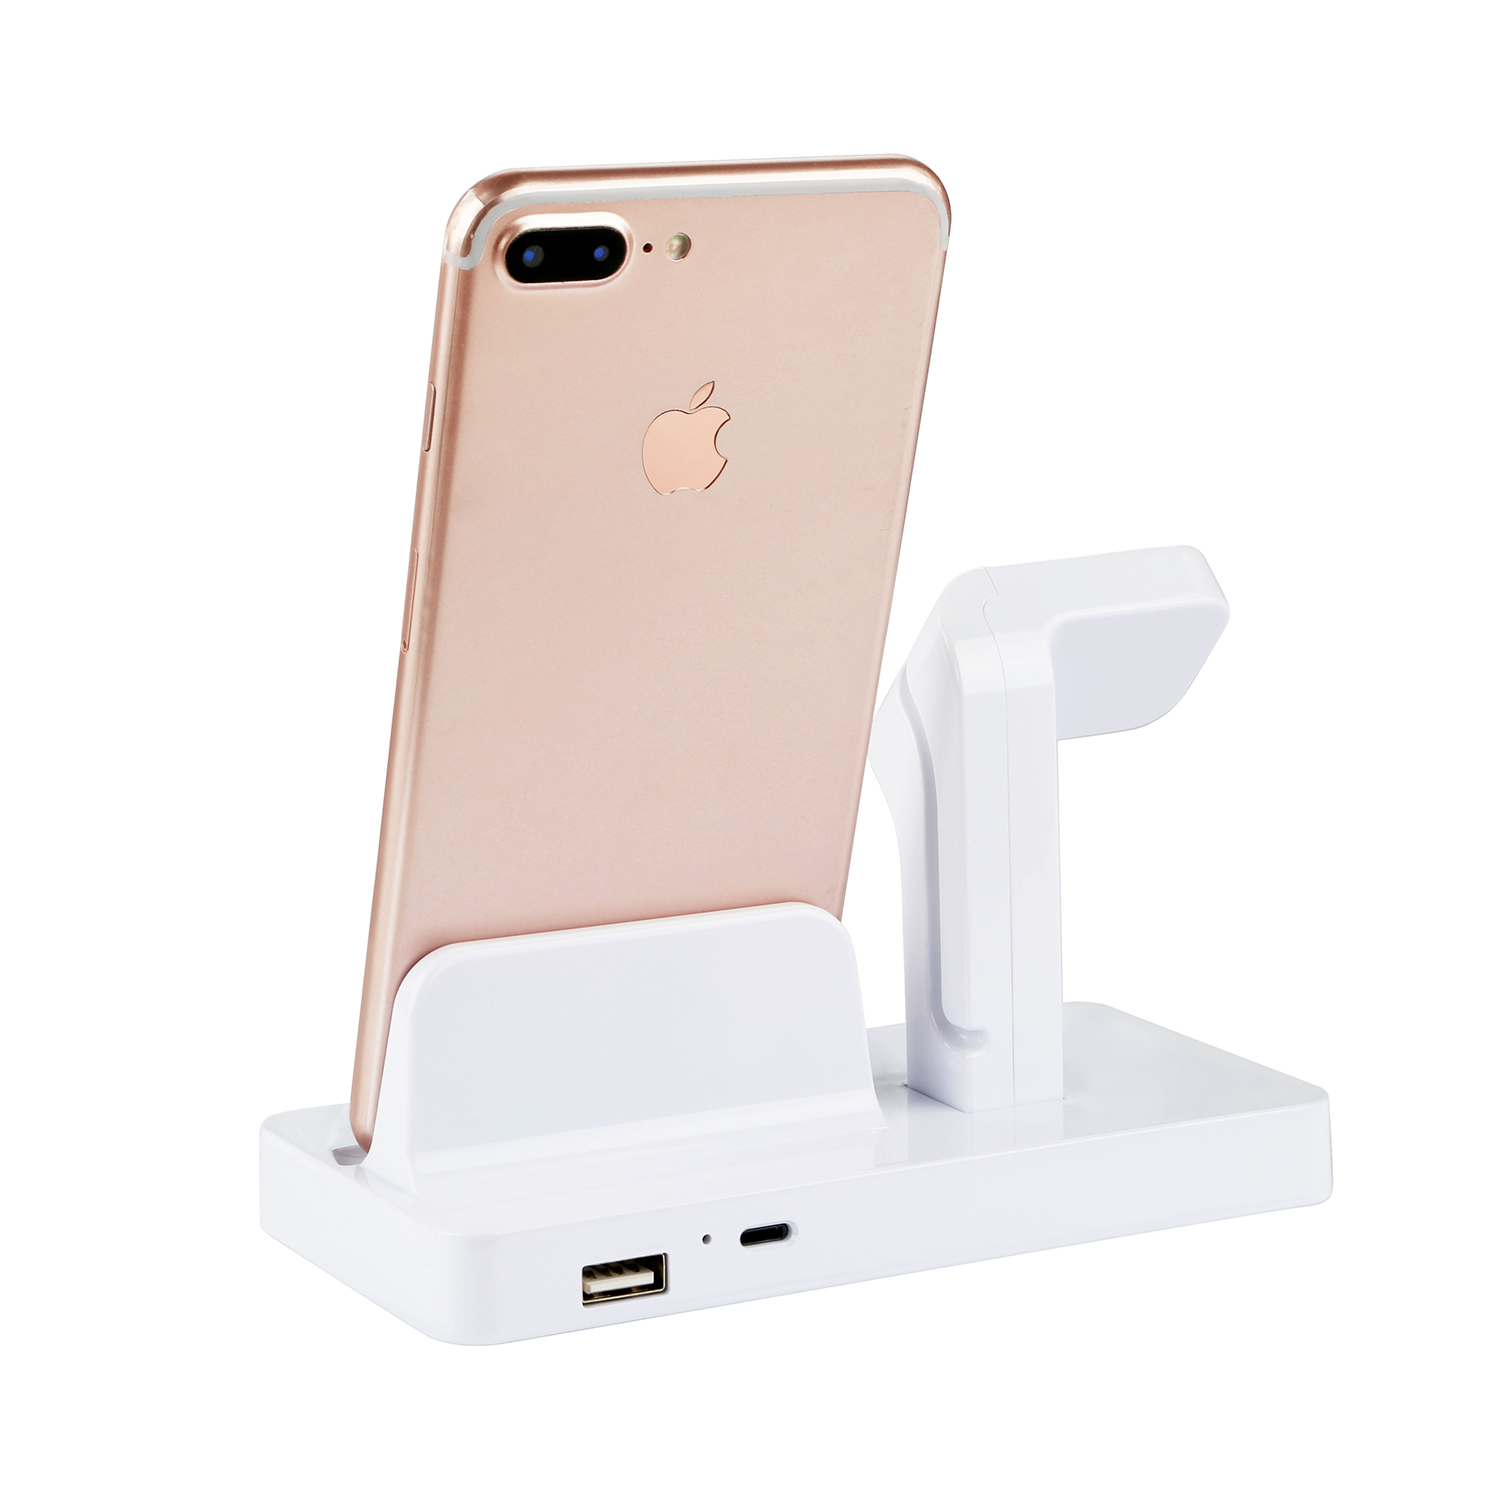 iMountek Charging Stand Dock Station Charger Holder for Apple Watch Series iPhone 11/X/8/8Plus/7 White - image 5 of 6